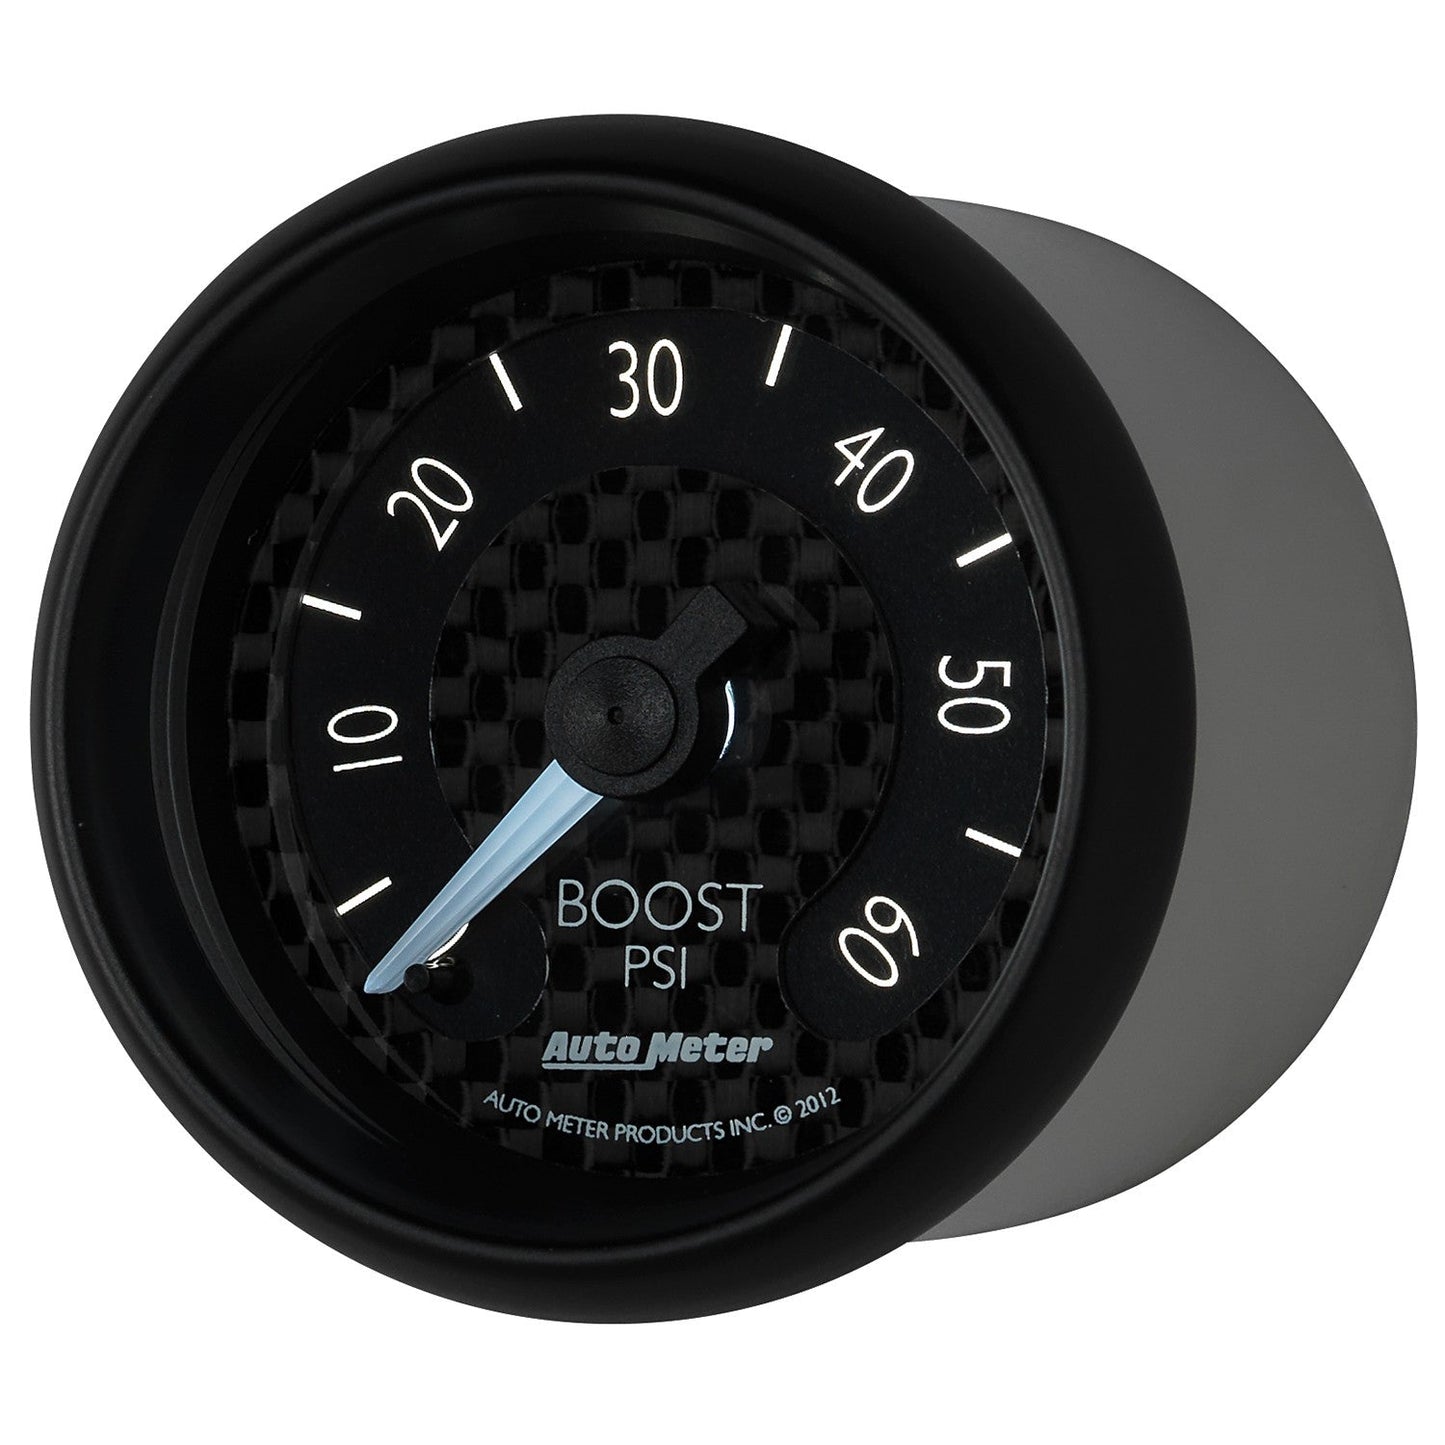 AutoMeter - 2-1/16" BOOST, 0-60 PSI, MECHANICAL, GT (8005)